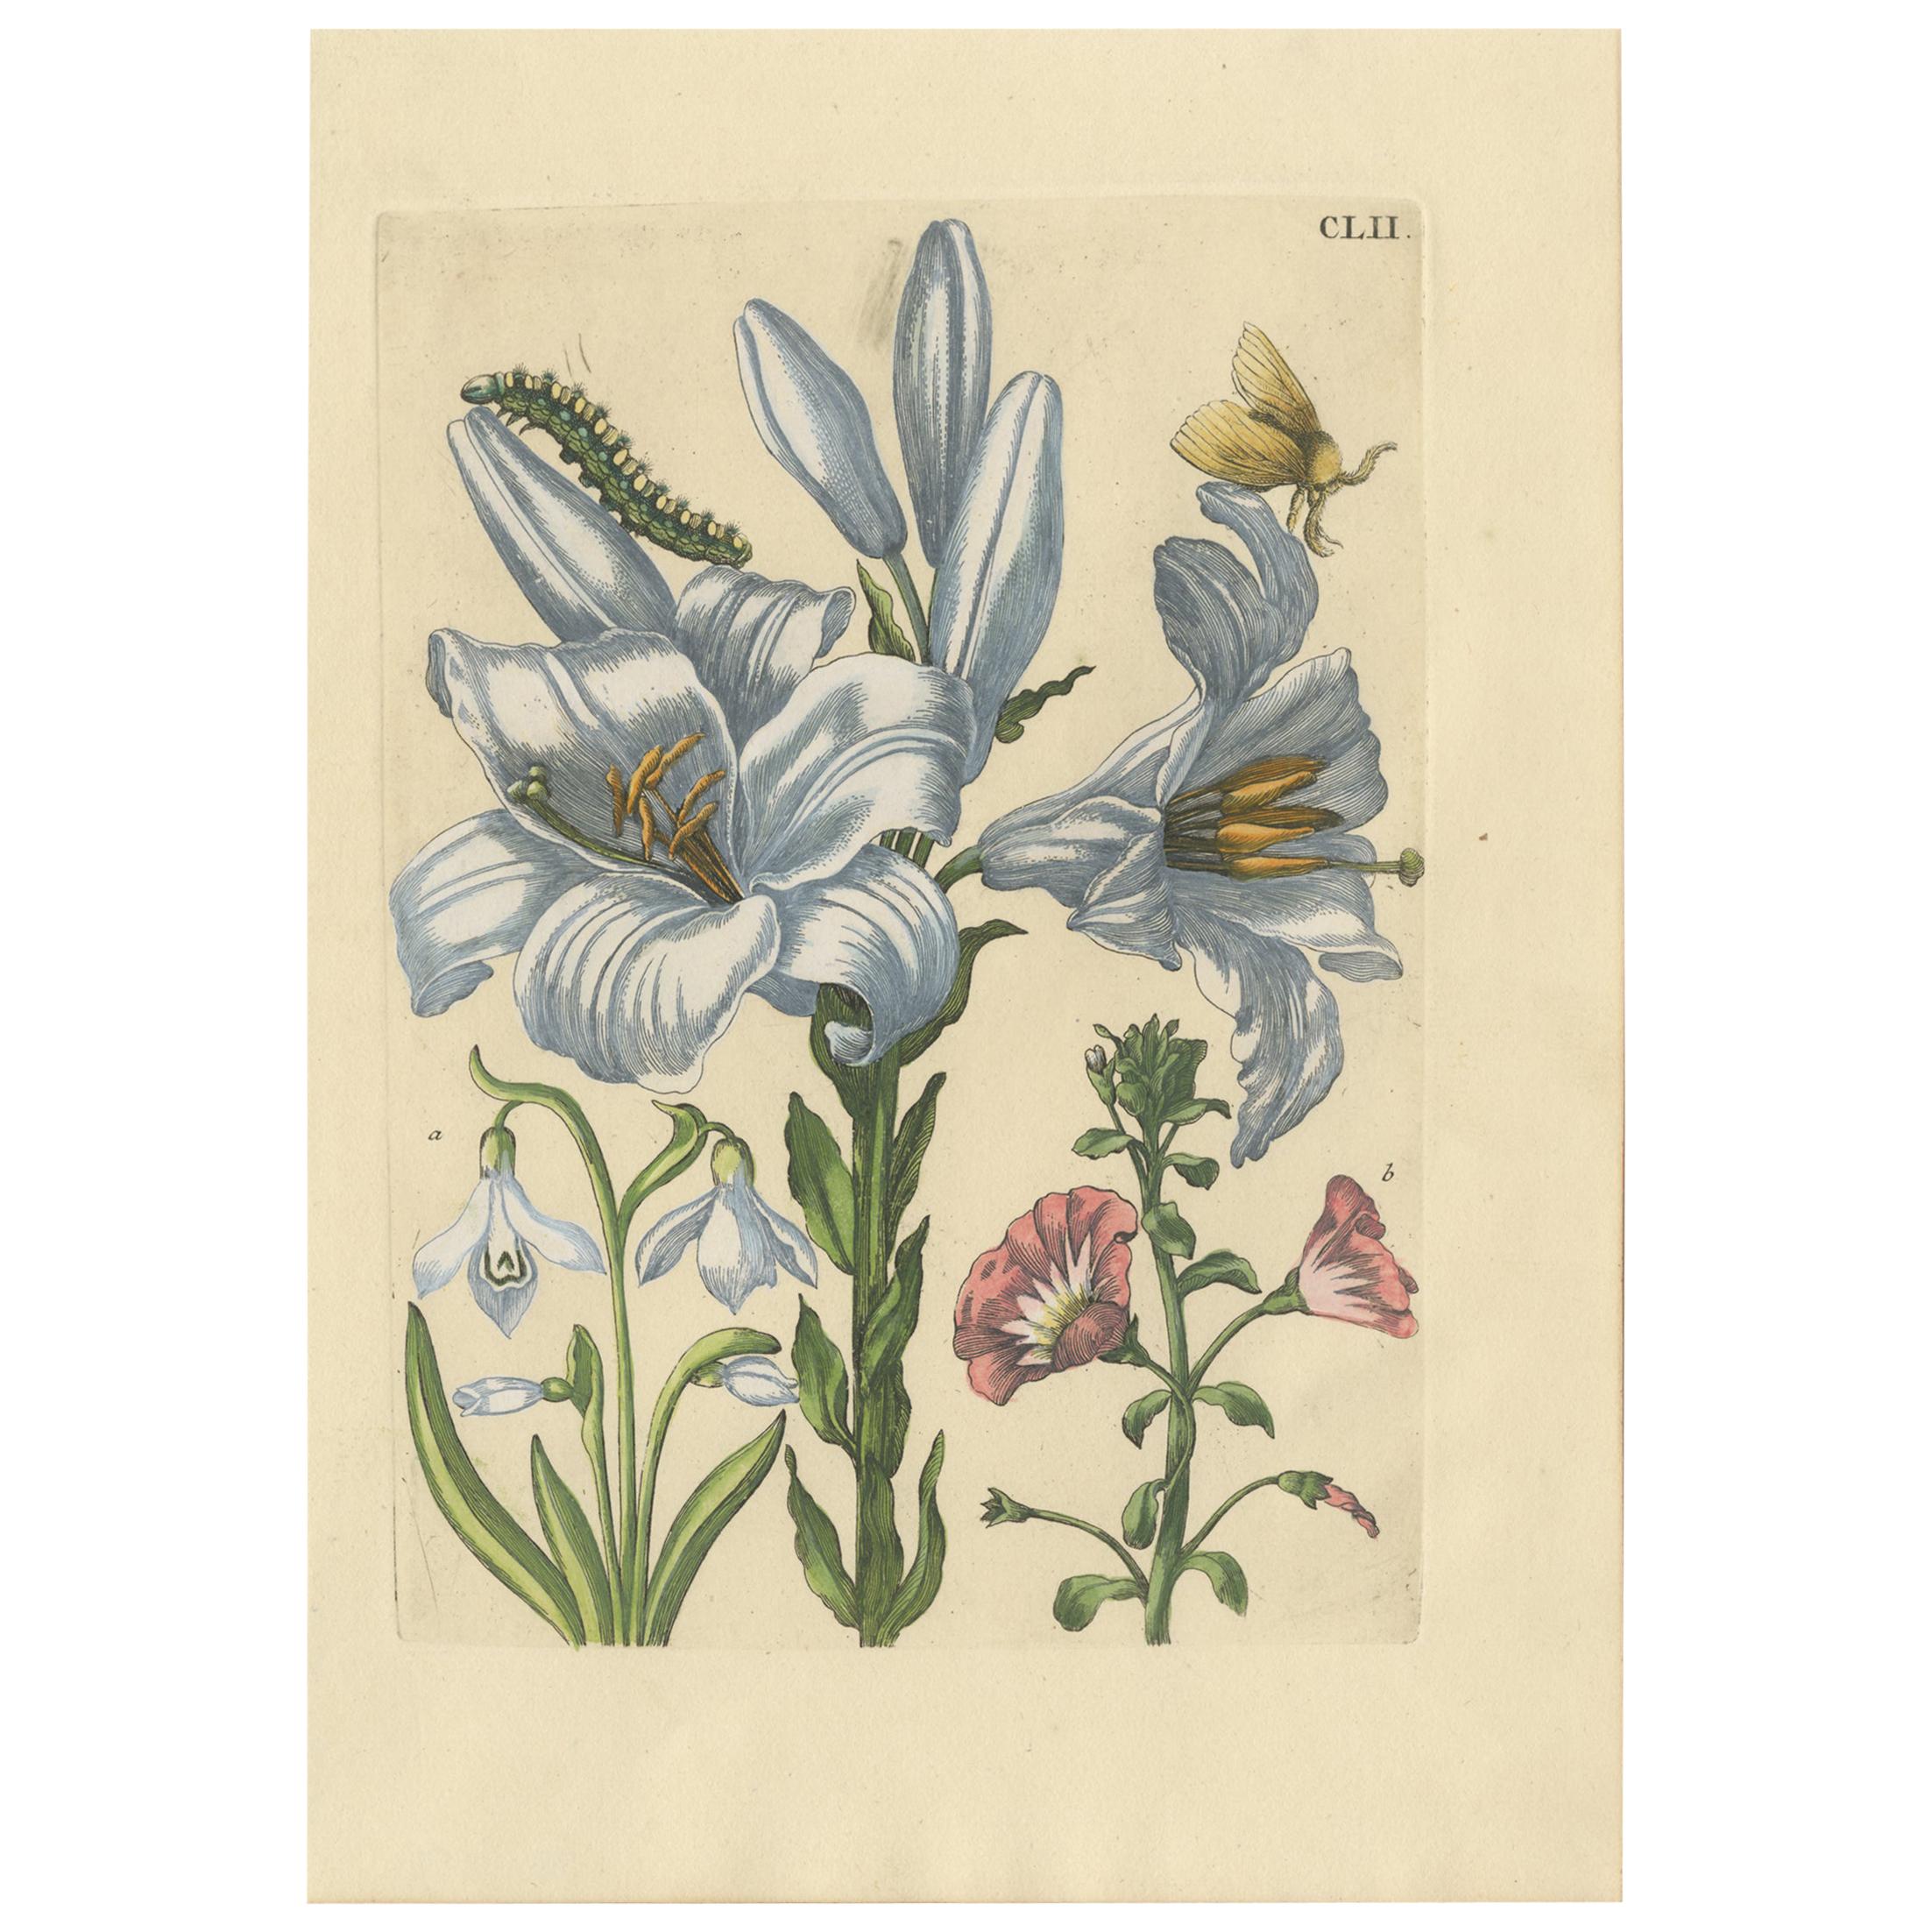 Antique Print of a Lily and Moth Metamorphosis by Merian, '1730'